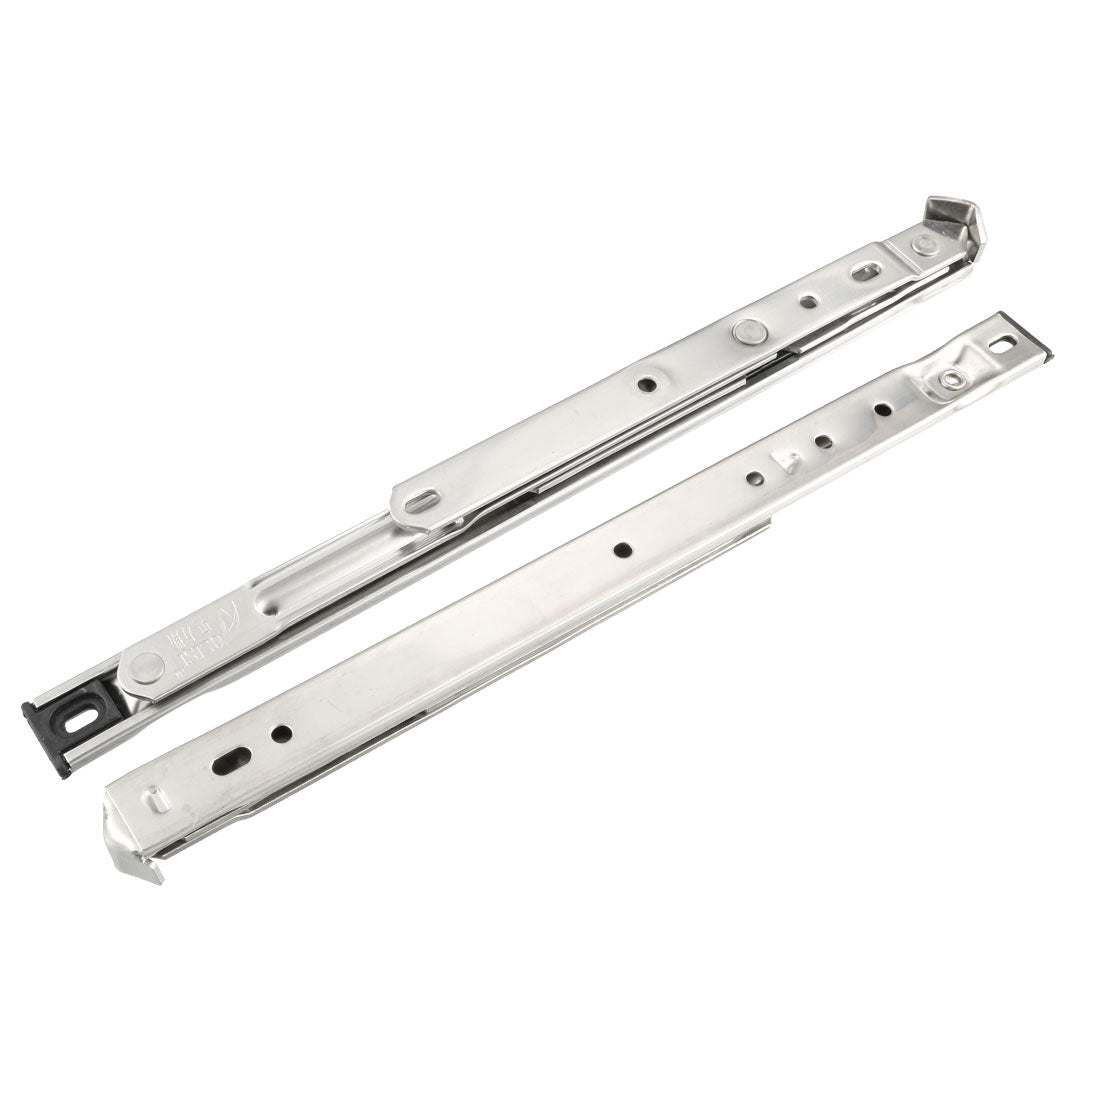 uxcell Uxcell 12-Inch Hanging/Casement Window Hinge, 202 Stainless Steel 2Pcs